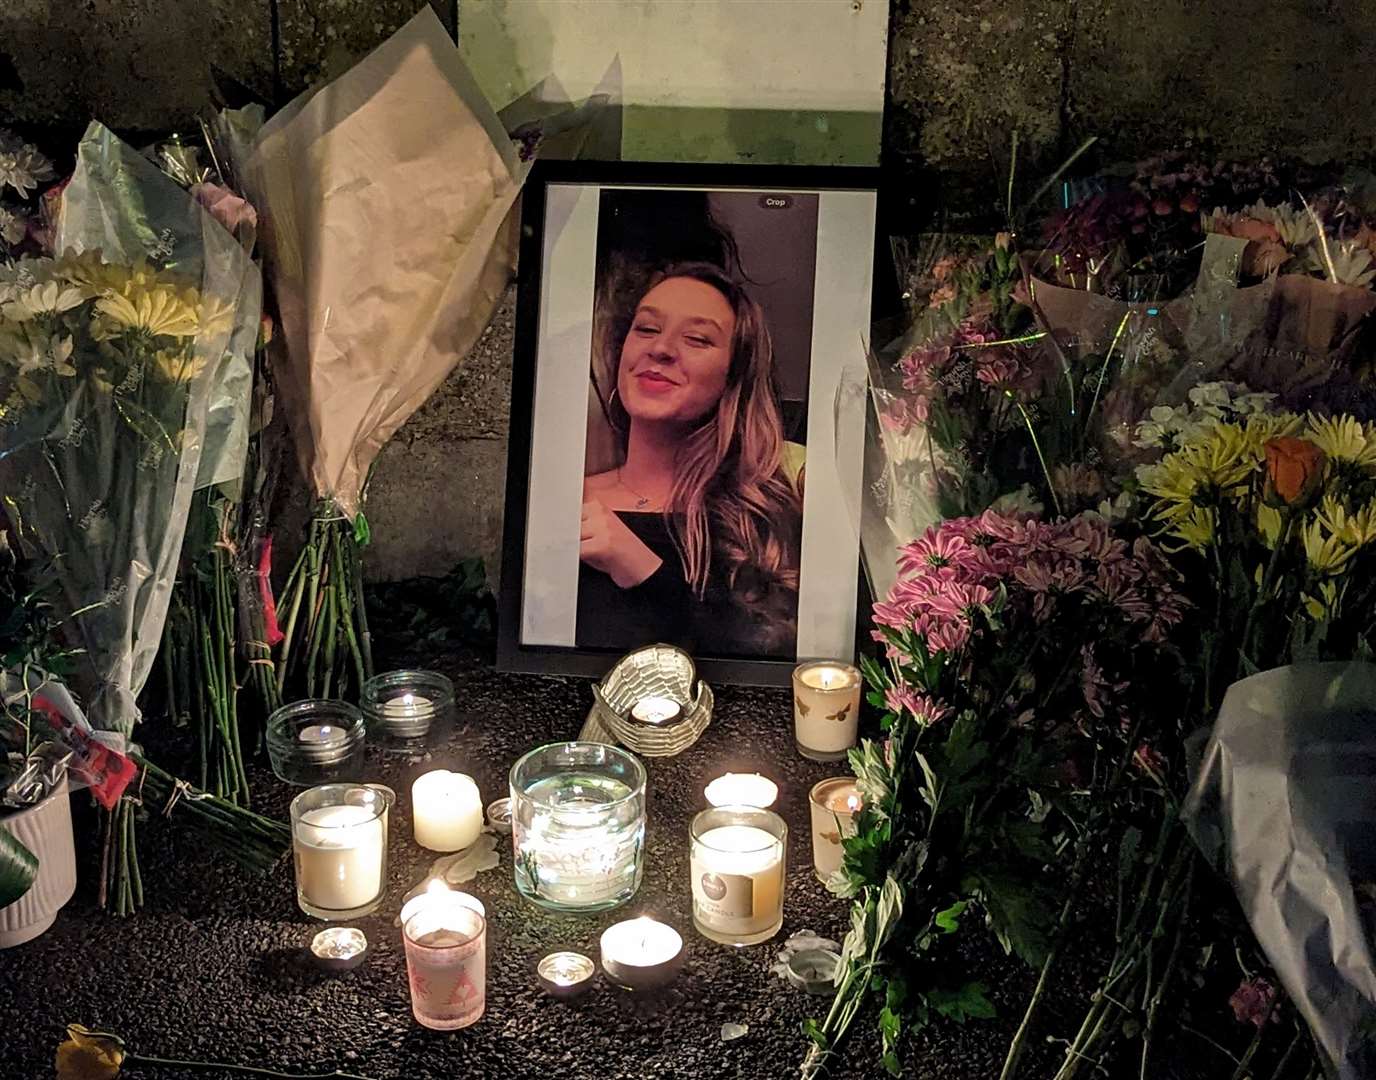 Many tributes have been left at the The Leas bandstand in Folkestone in memory of Leah Daley, 24. Picture: Rhys Griffiths